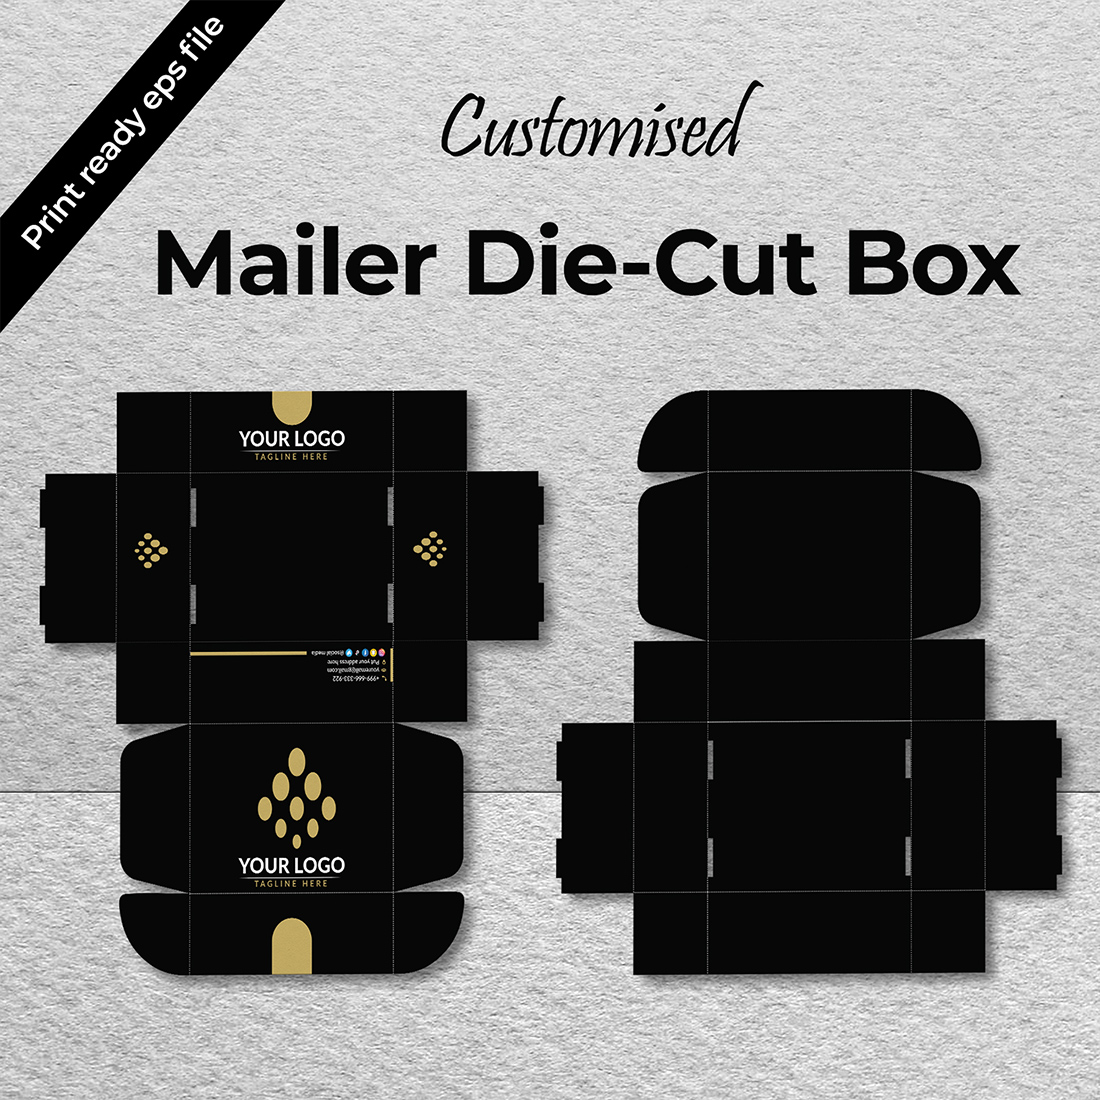 Mailer Packaging Box Template (Print-Ready) cover image.